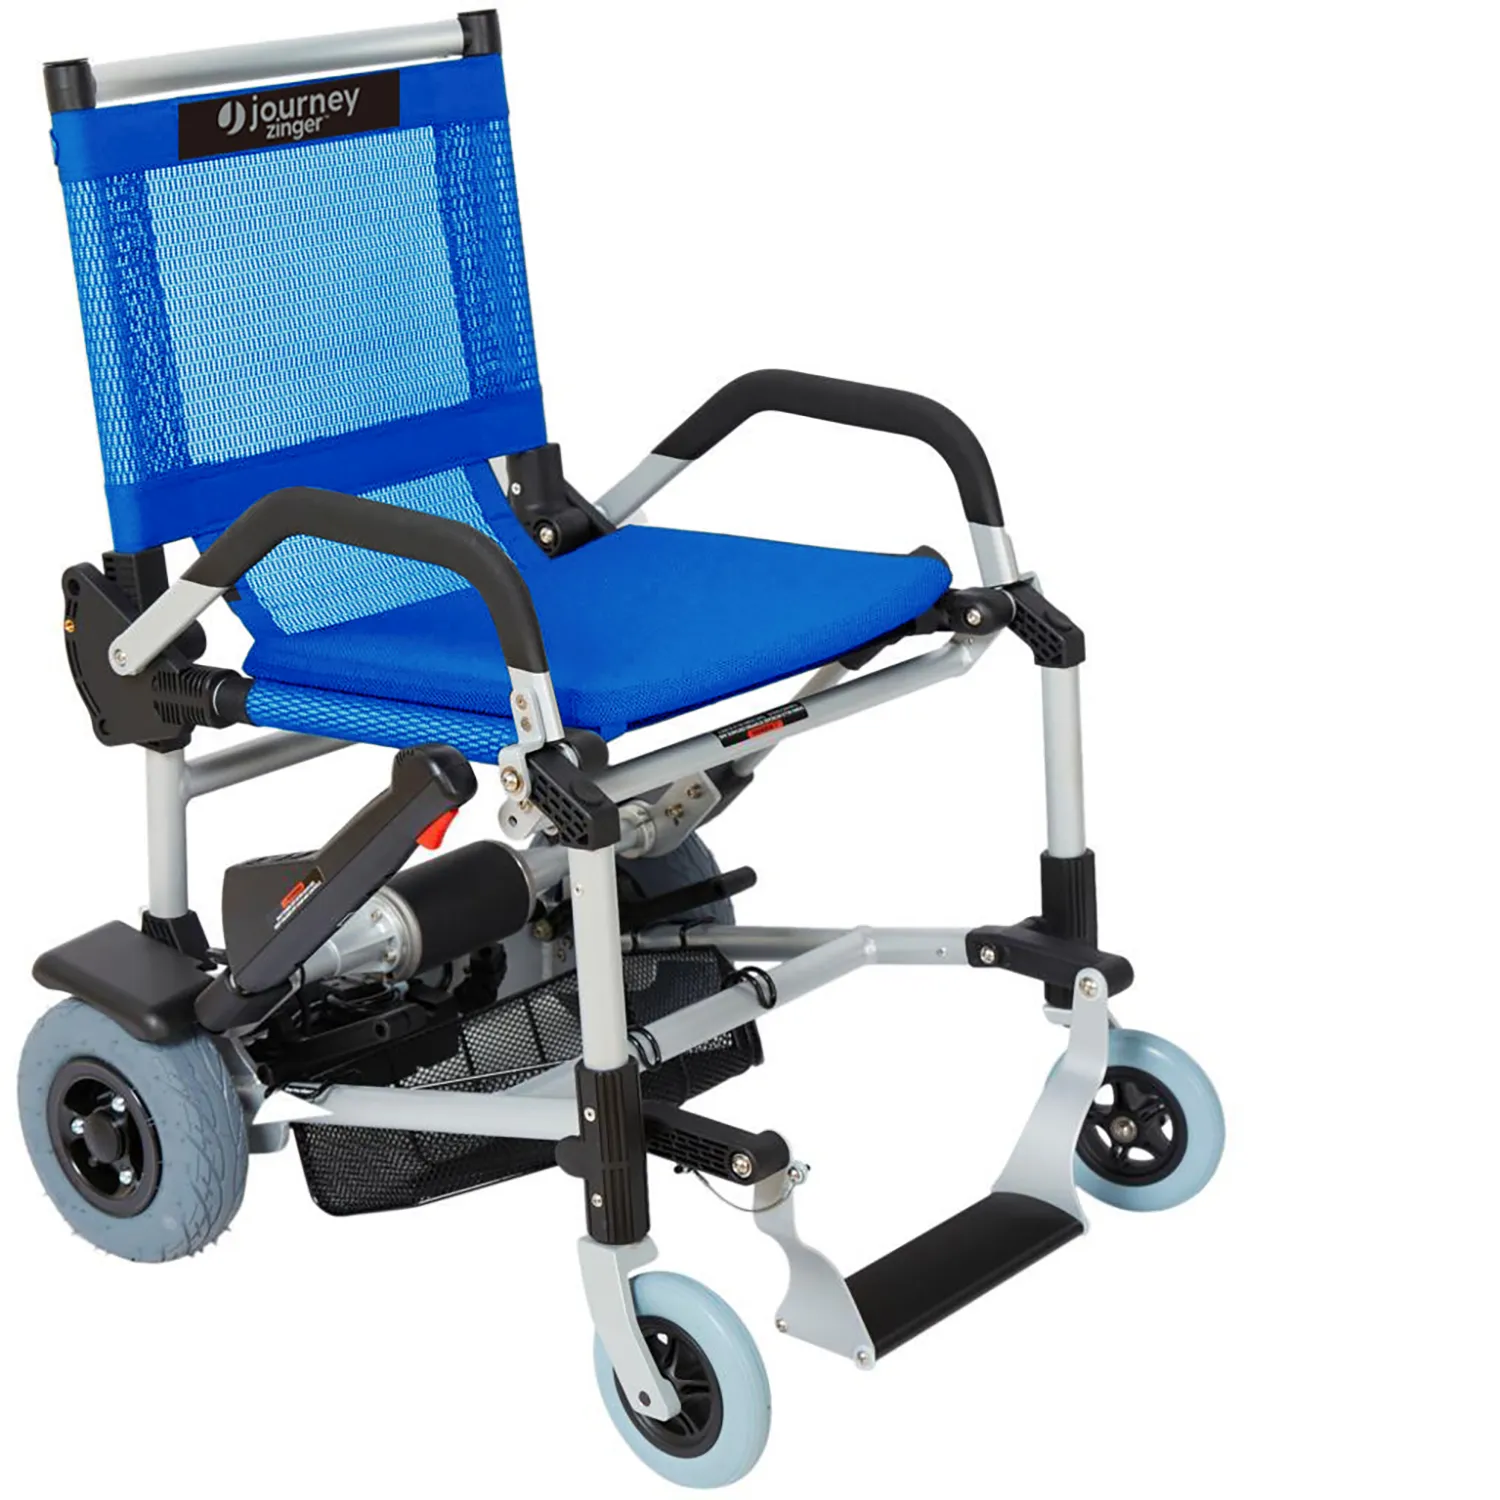 Journey Zinger Folding Power Chair- Lightweight Power Chair with Two-Handed Control Power wheelchairs Journey Blue  